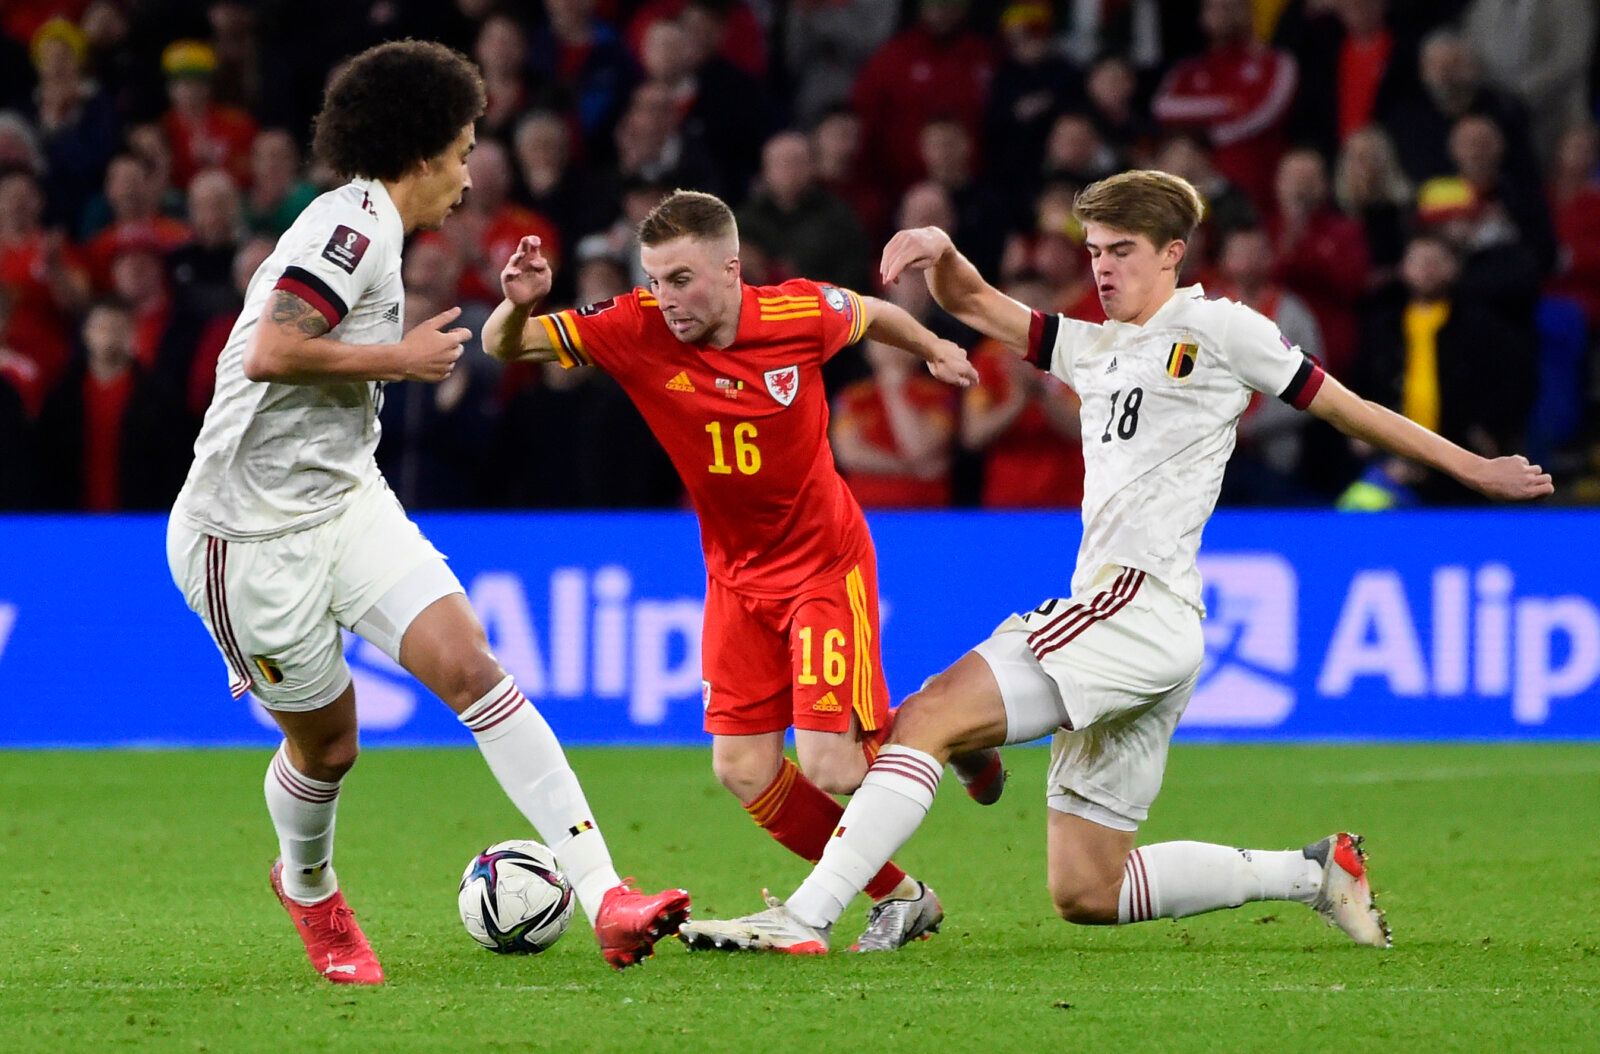 Soccer Football - World Cup - UEFA Qualifiers - Group E - Wales v Belgium - Cardiff City Stadium, Cardiff, Wales, Britain - November 16, 2021 Wales' Joe Morrell in action with Belgium's Axel Witsel and Charles De Ketelaere REUTERS/Rebecca Naden